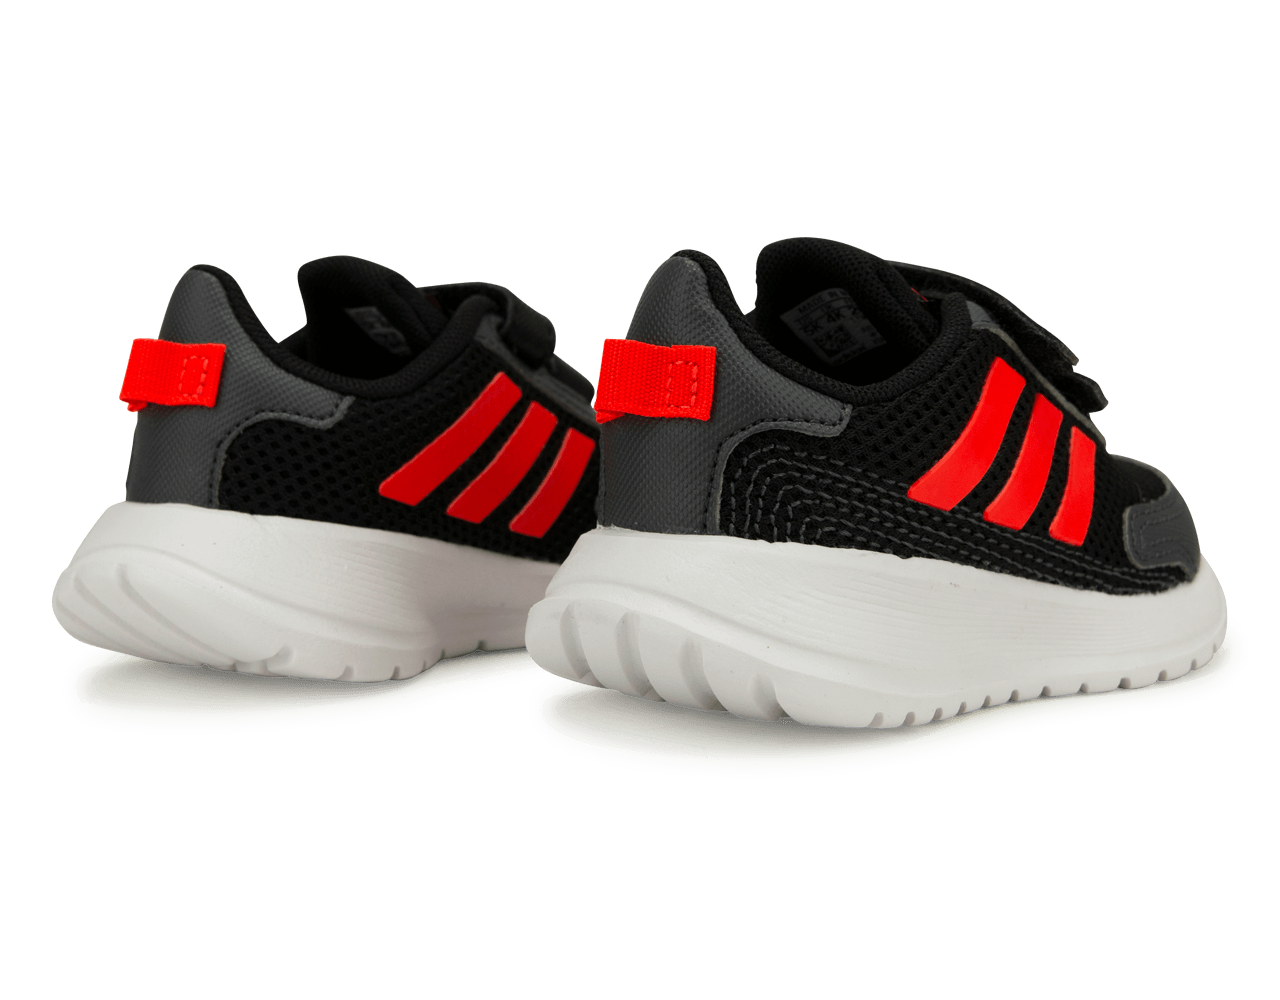 adidas Toddlers Tesnor Run I Shoes Black/White/Red rear